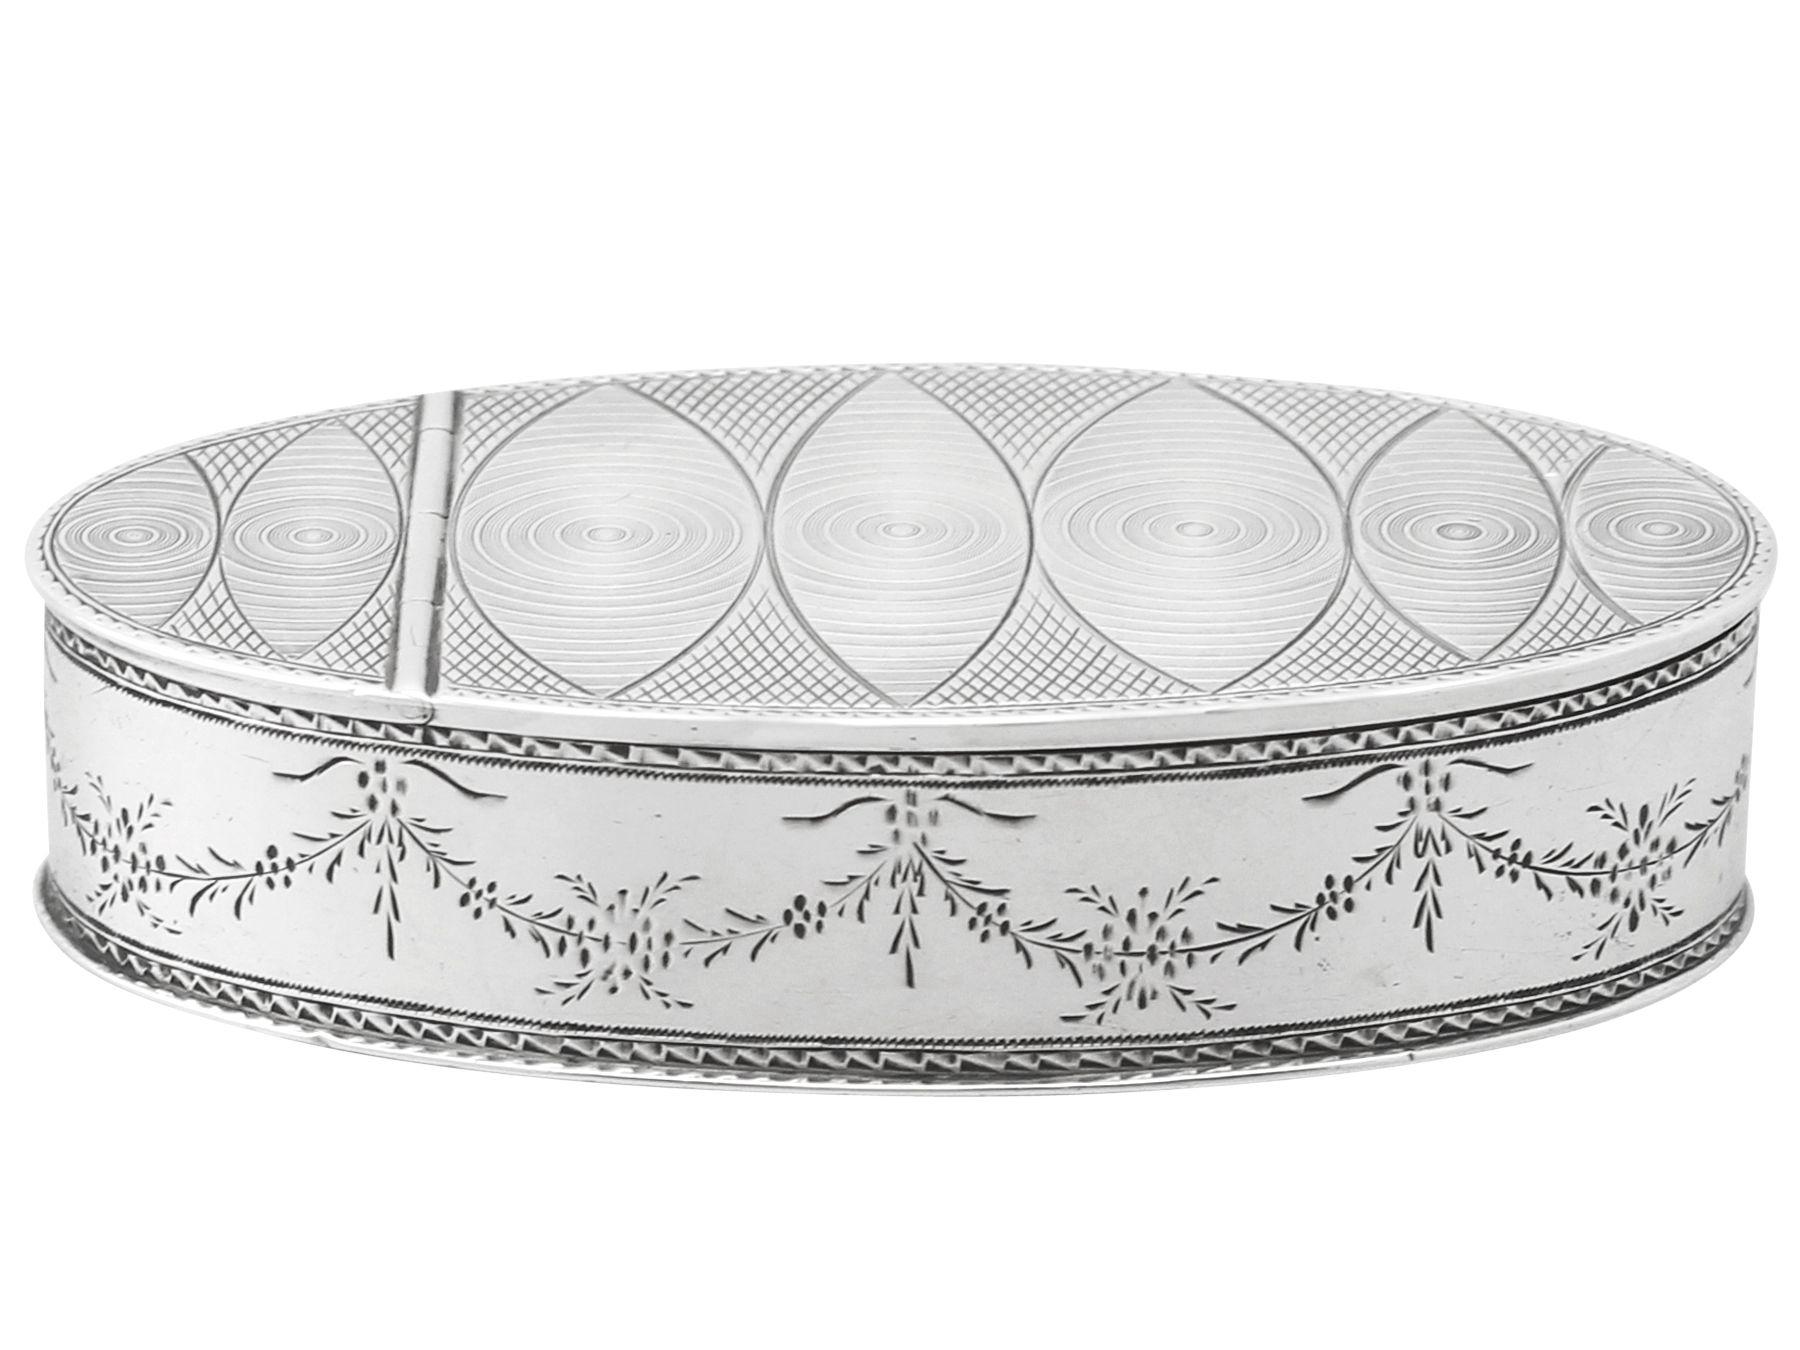 An exceptional, fine and impressive antique Austrian silver table snuff box; an addition to our ornamental silverware collection.

This exceptional antique Austrian silver table snuff box has a plain oval form.
The sides of the body are